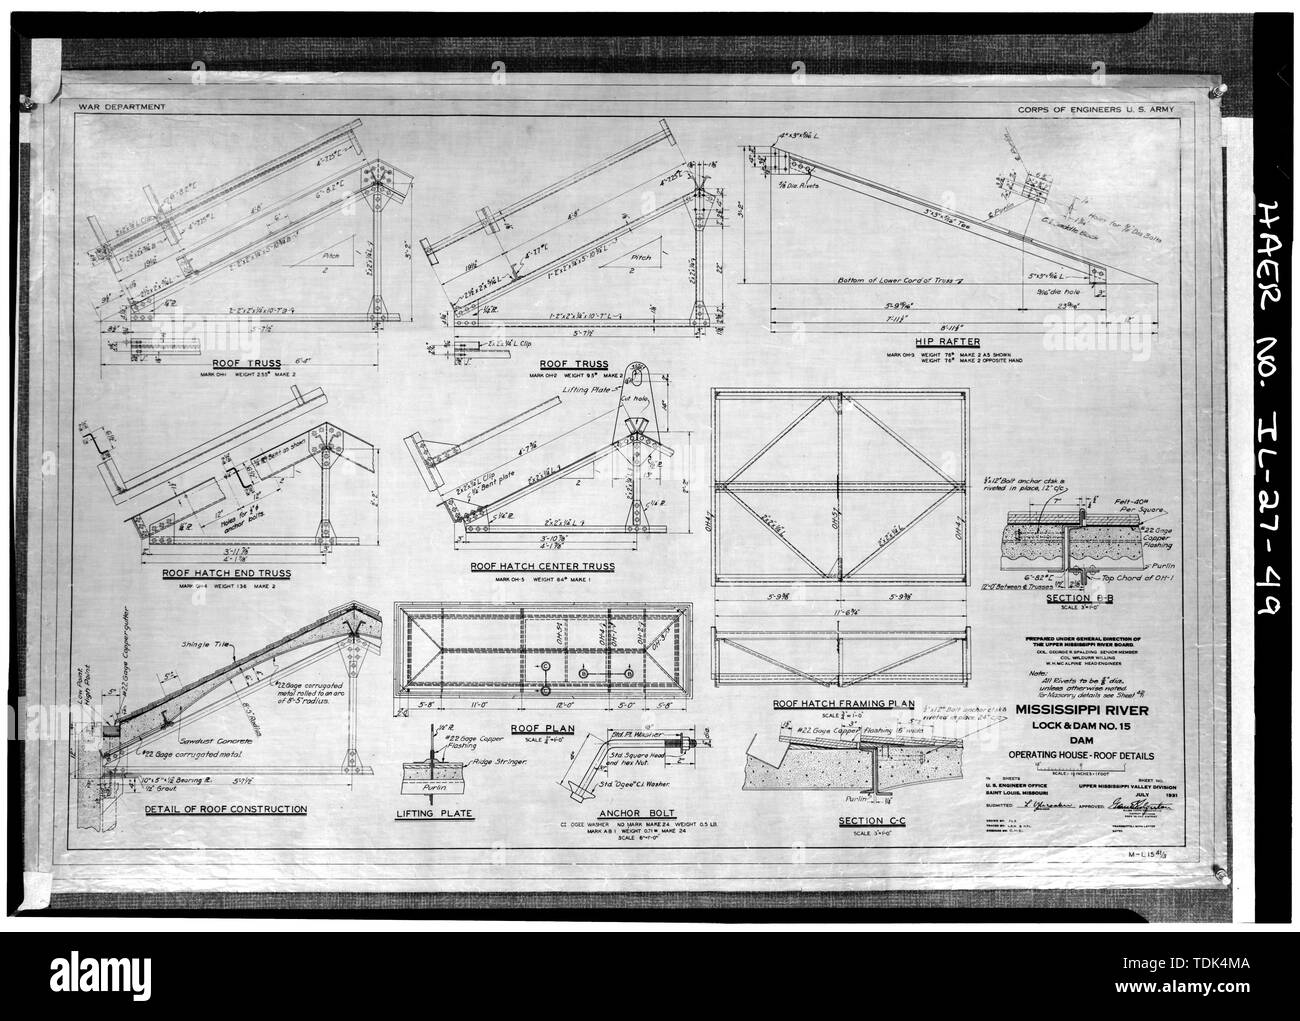 OPERATING HOUSE-ROOF DETAILS. July 1931 - Mississippi River 9-Foot Channel Project, Lock and Dam No. 15, Upper Mississipi River (Arsenal Island), Rock Island, Rock Island County, IL; U.S. Army Corps of Engineers; S.A. Healy Company; Merrit-Chapman-Whitney Corporation; Ylvisaker, Lenvik; Piel, John H; McCormick, Herbert Stock Photo